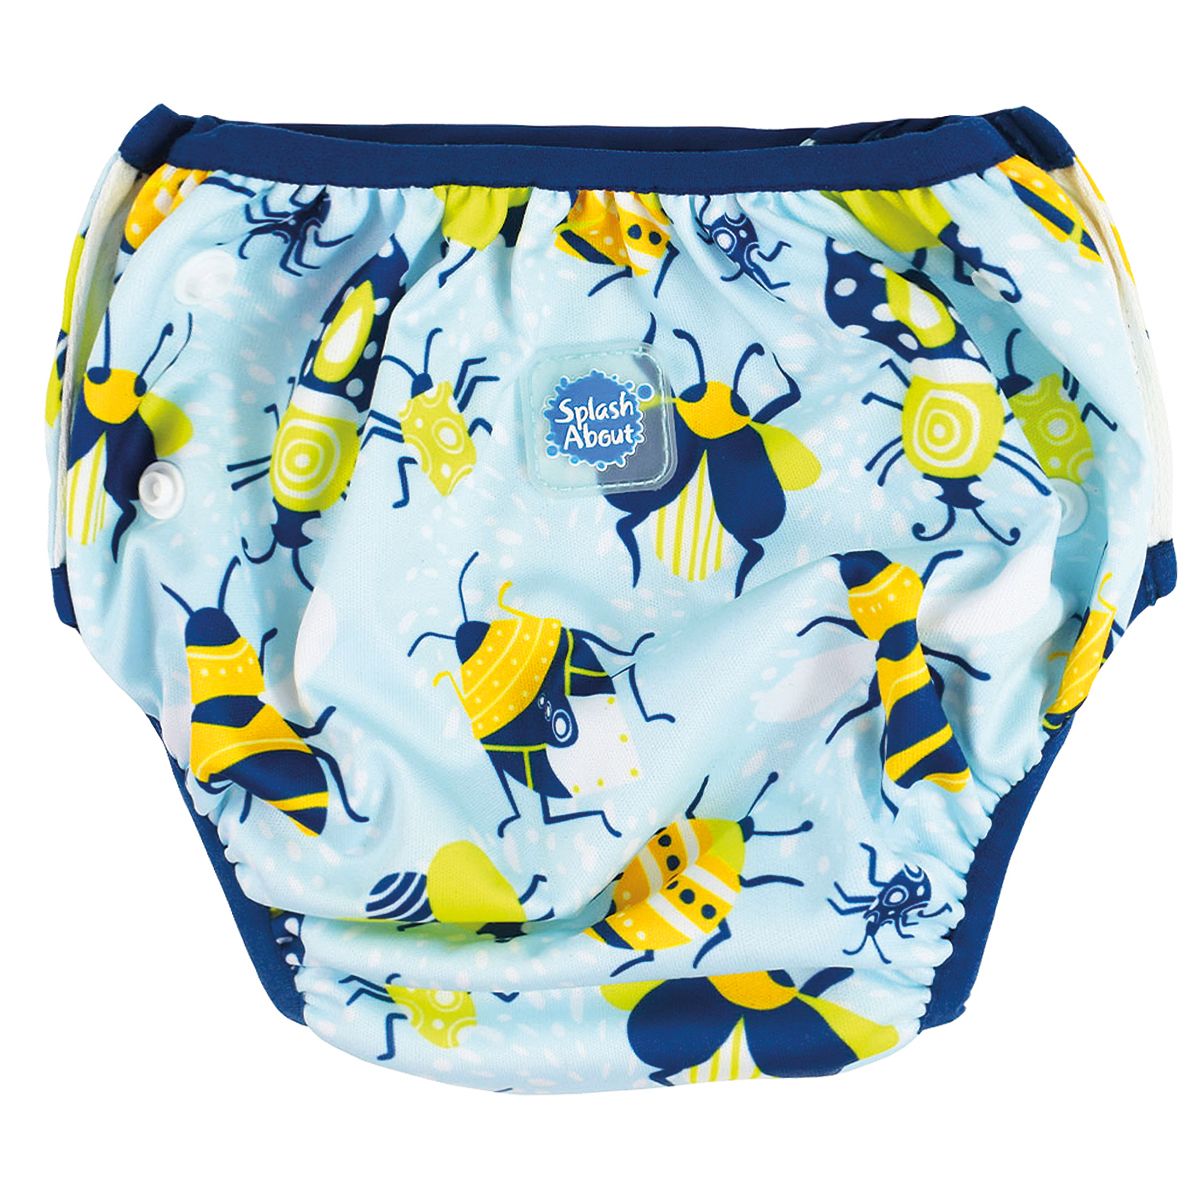 Adjustable under nappy in light blue with navy blue trims and cute bugs print. Back.